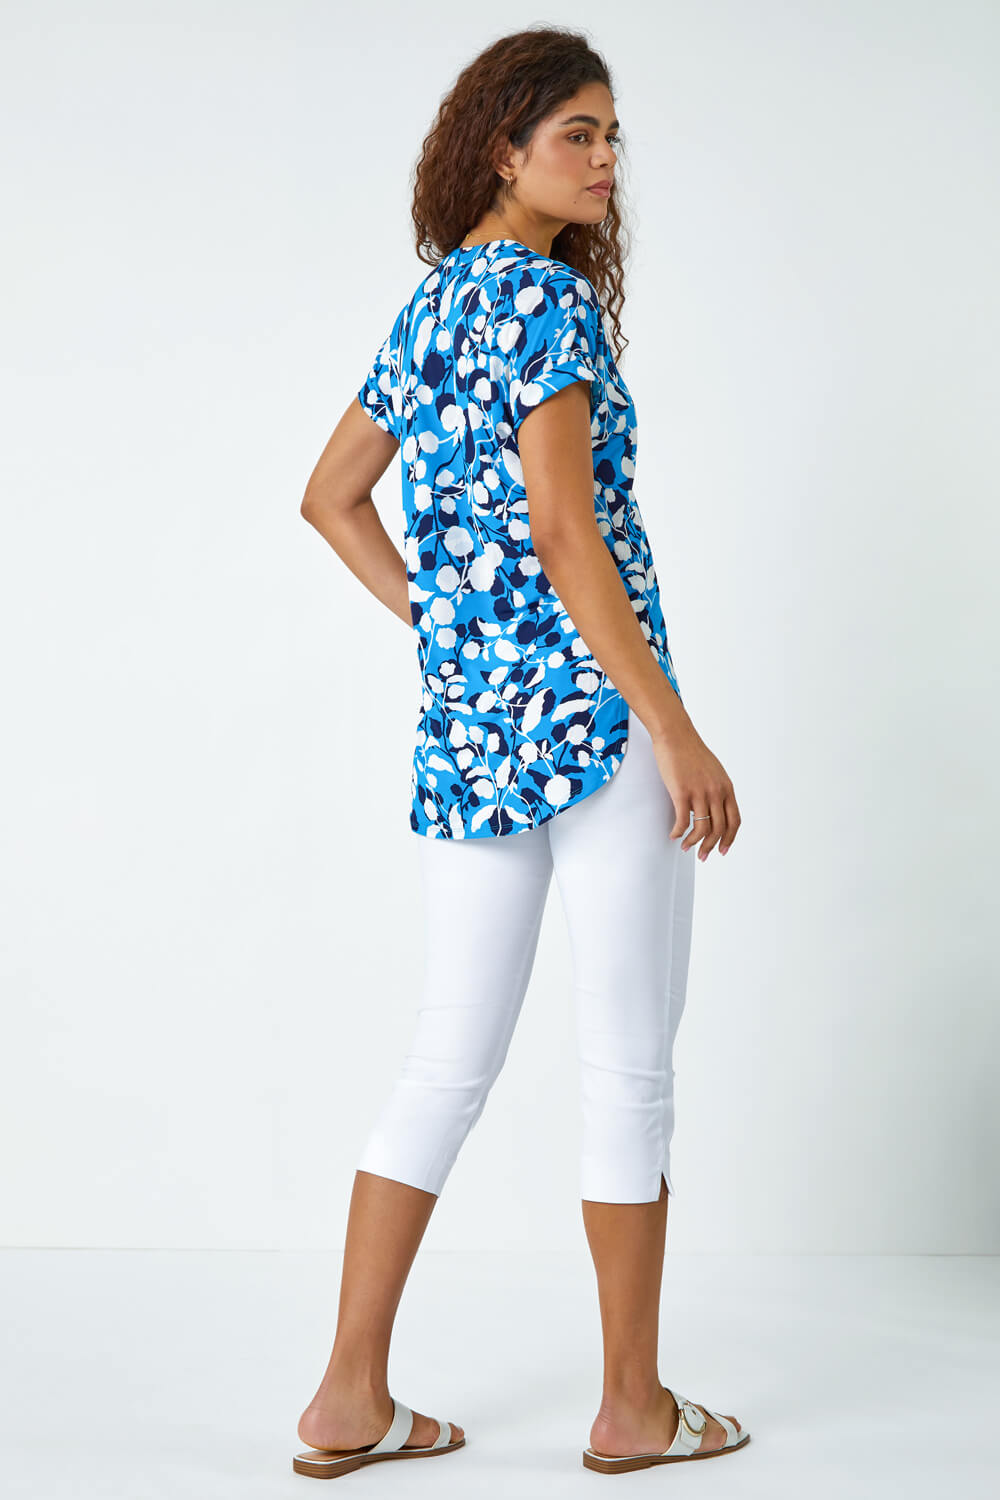 Turquoise Textured Floral Overshirt Stretch Top, Image 3 of 5